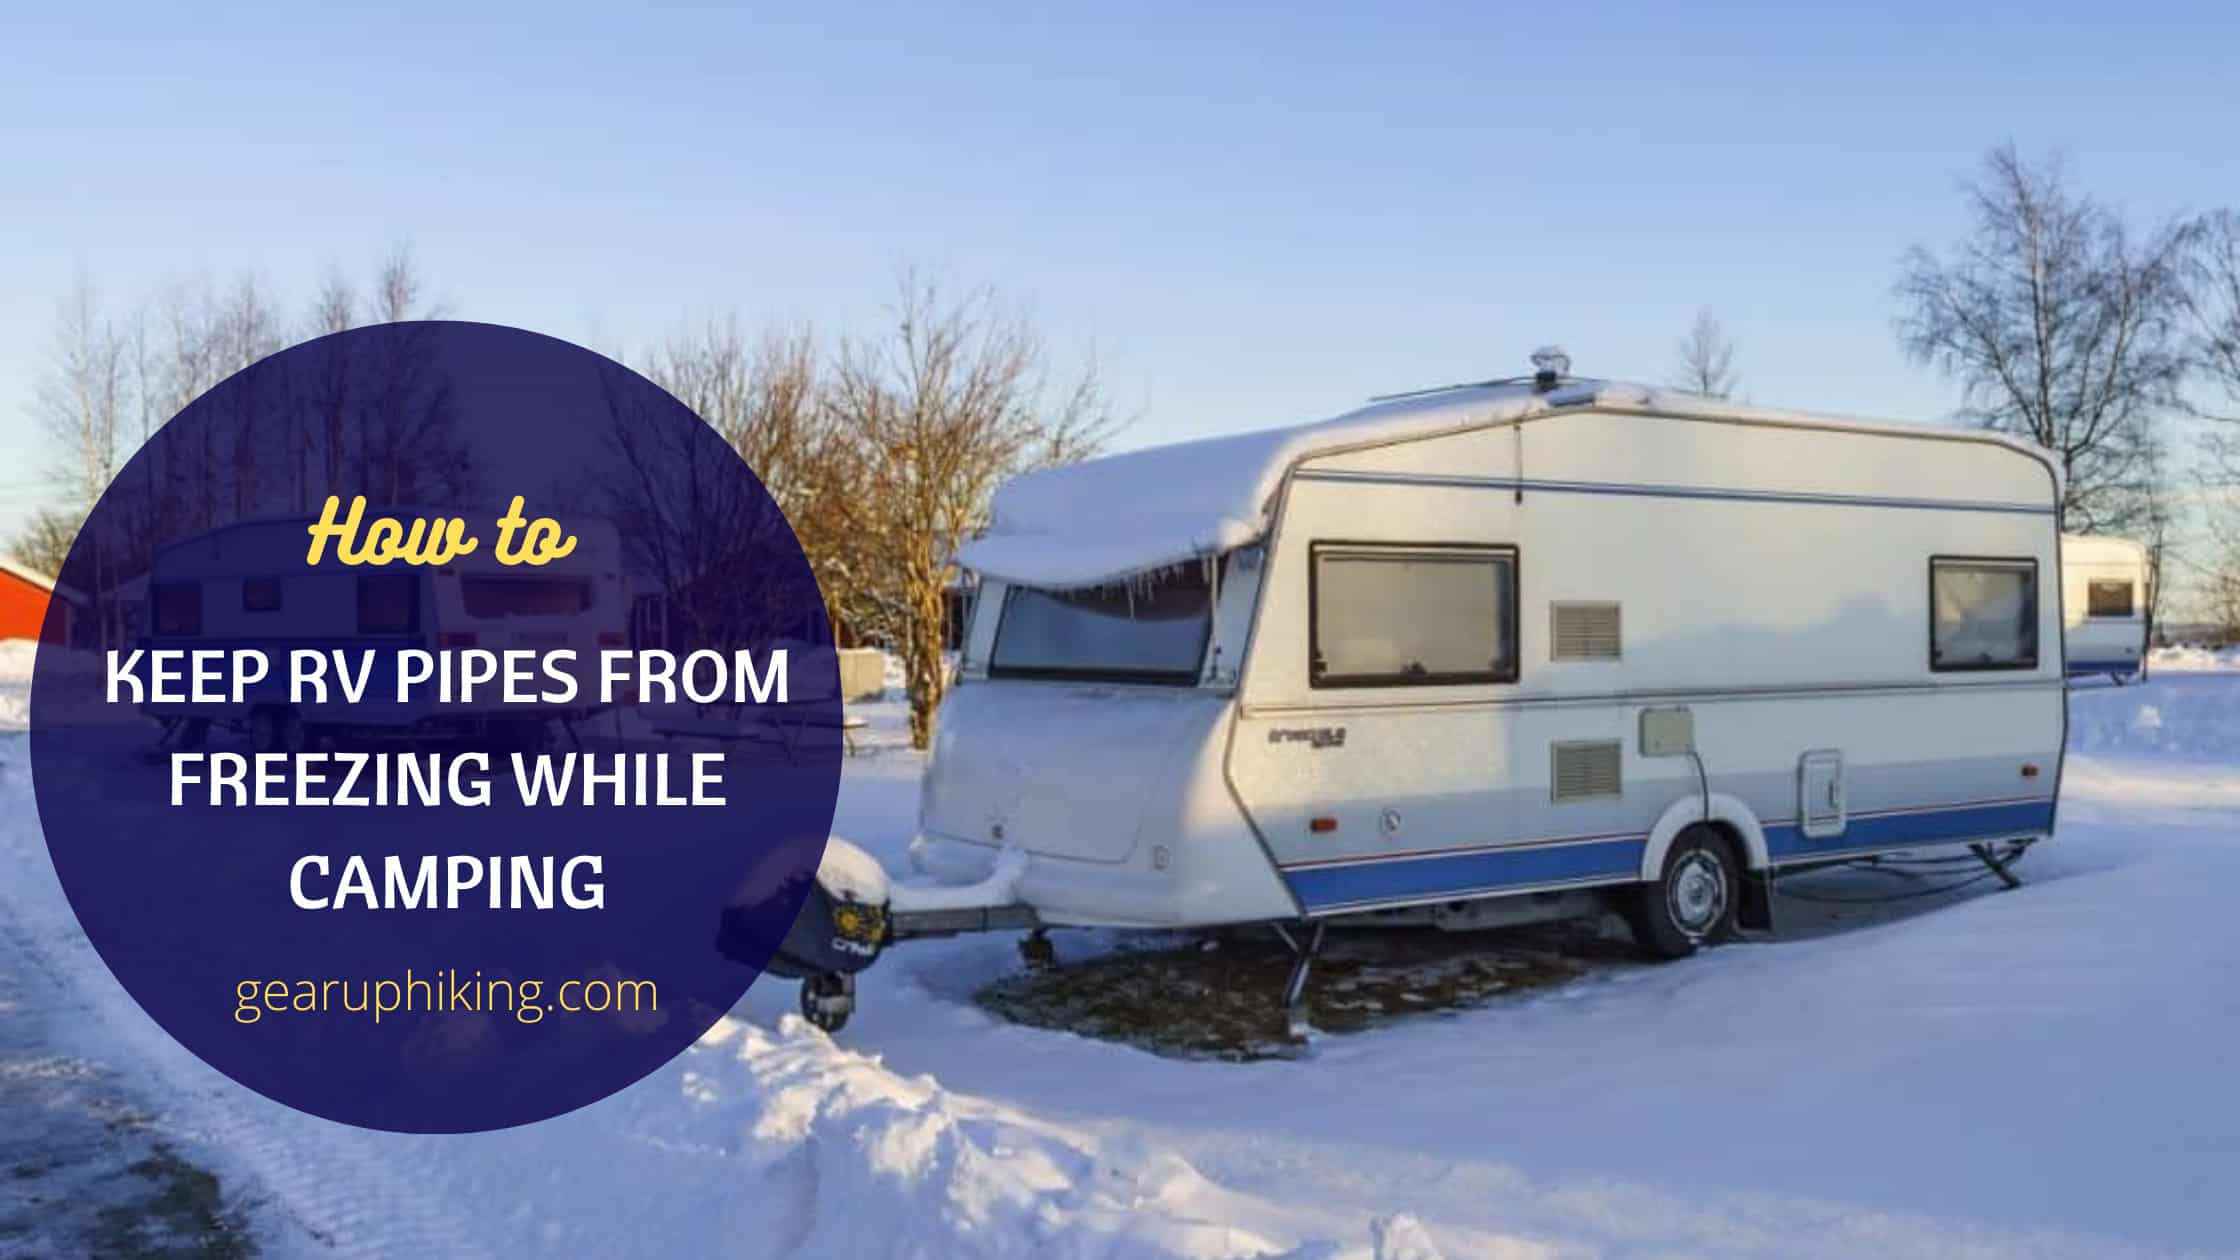 How to keep RV pipes from freezing while camping